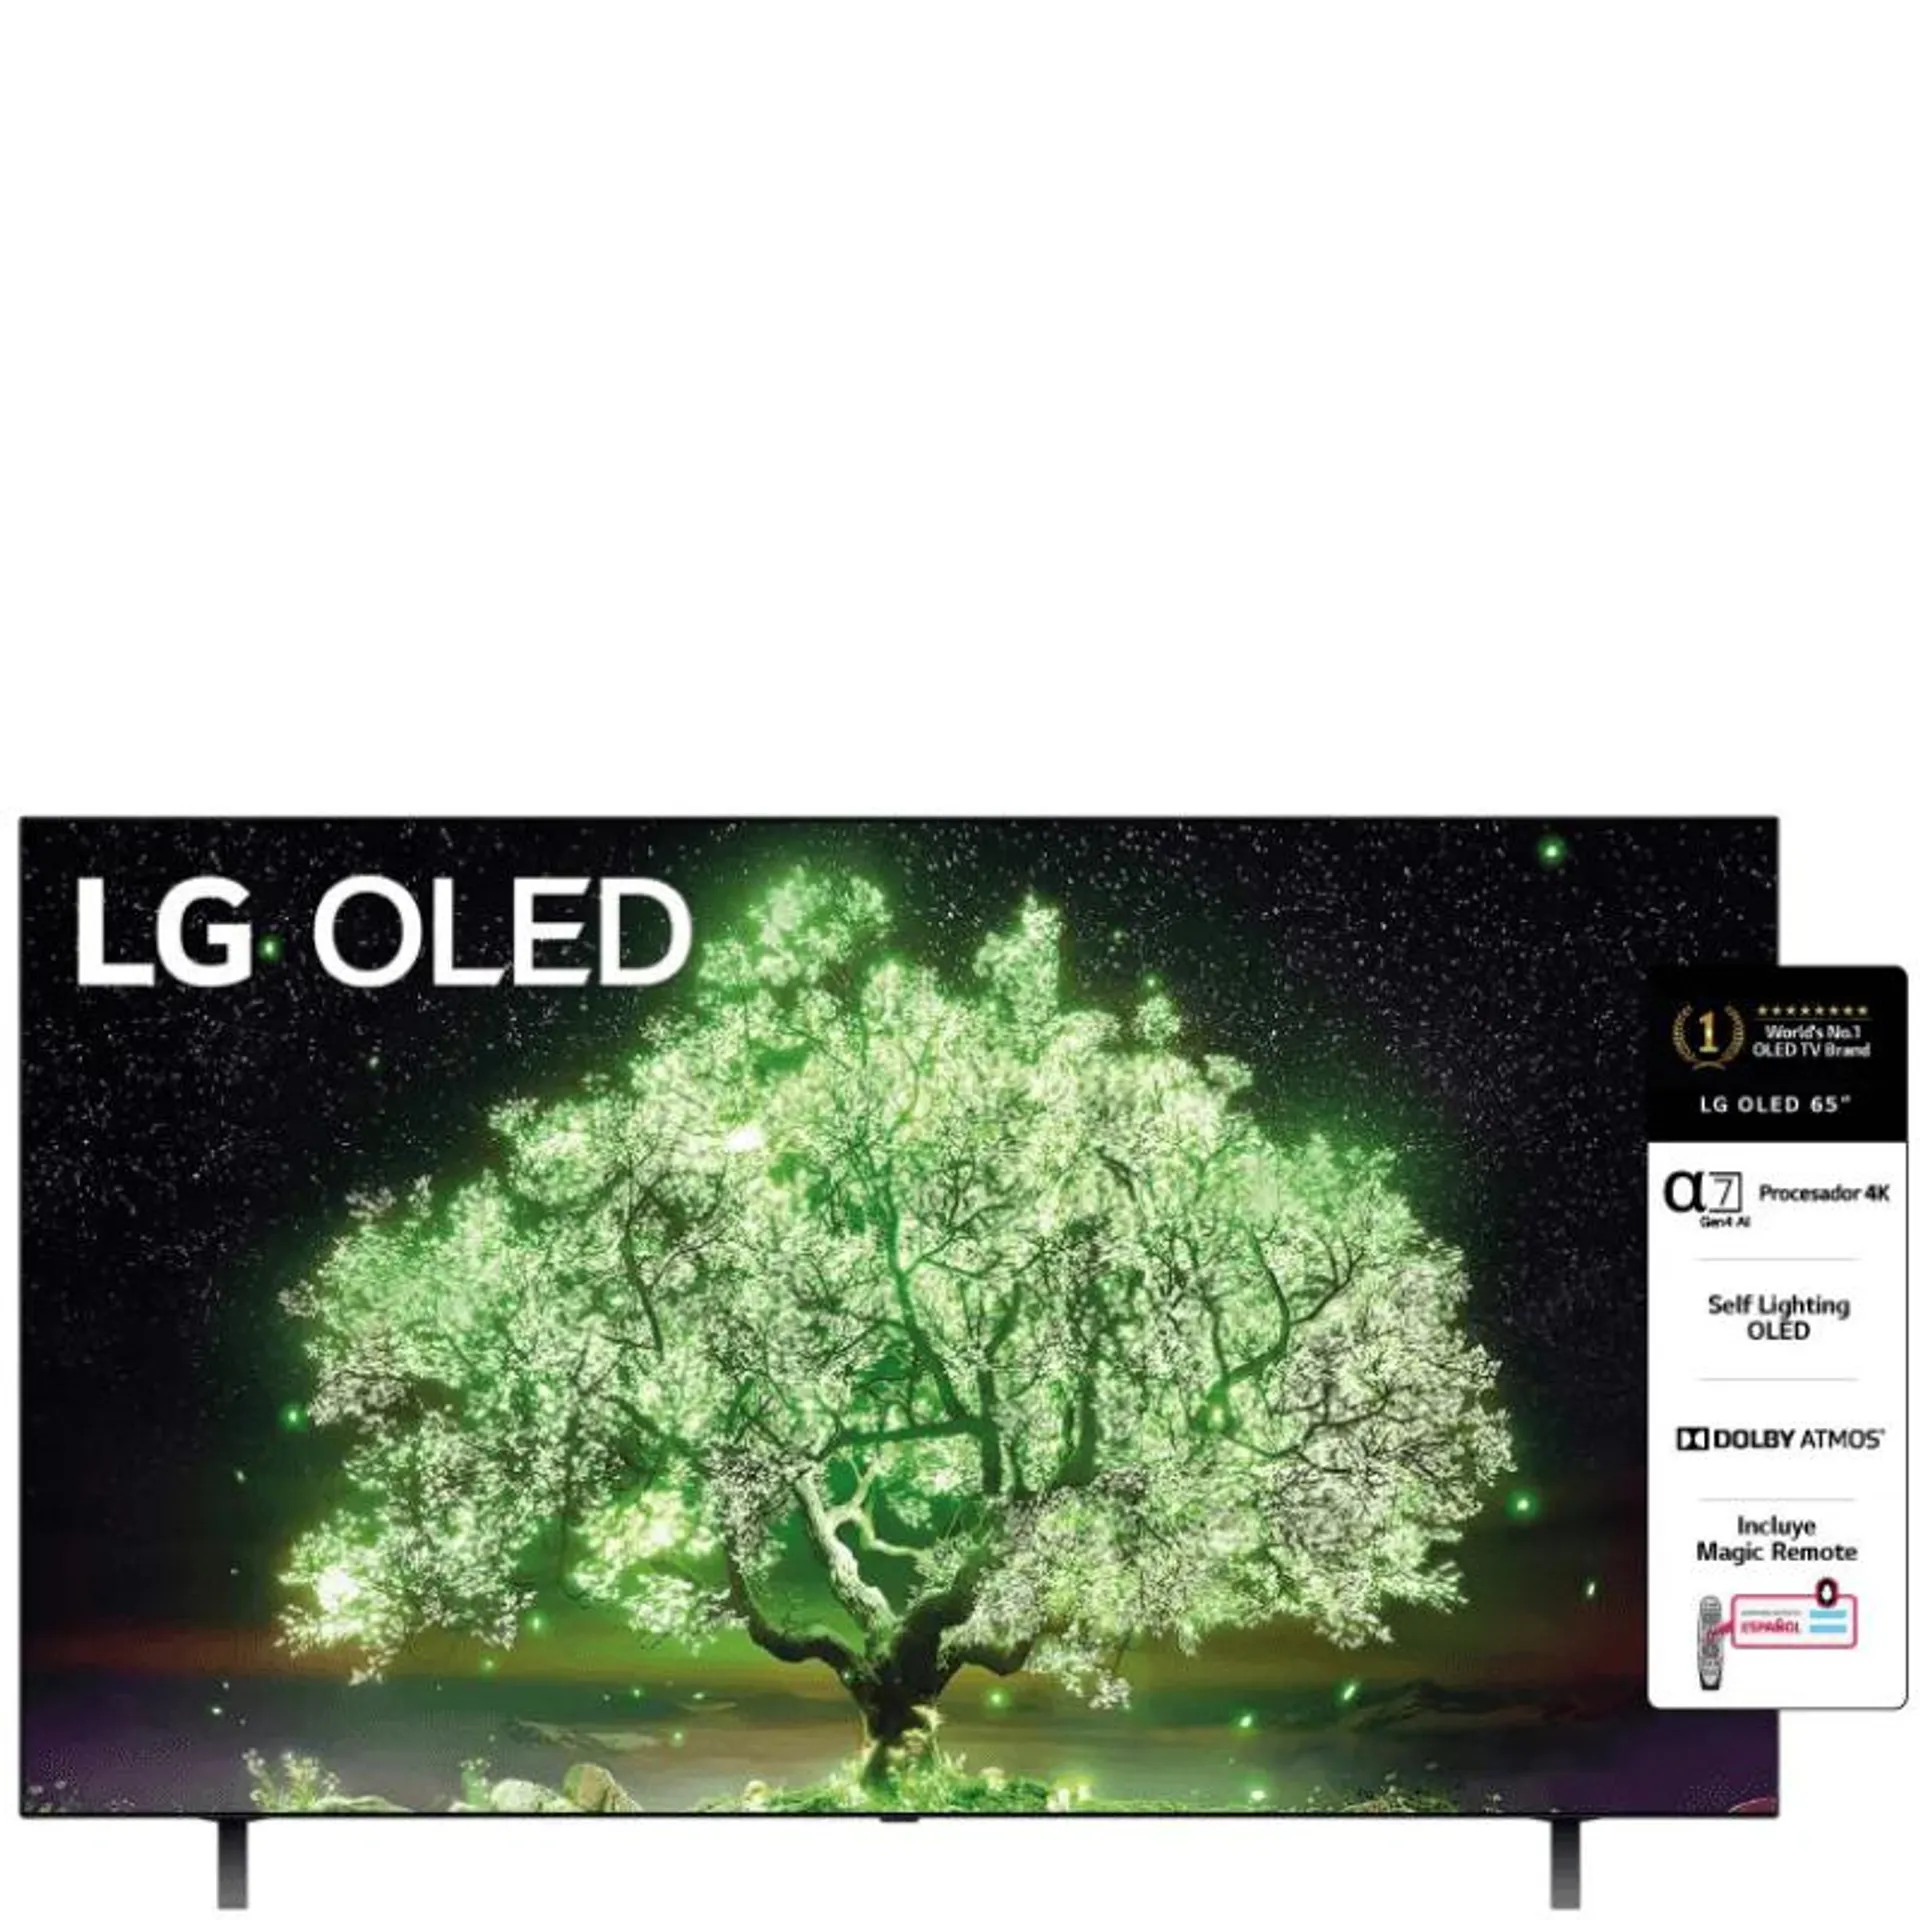 SMART TV 65" OLED 4K ULTRA HD DOLBY VISION/ATMOS